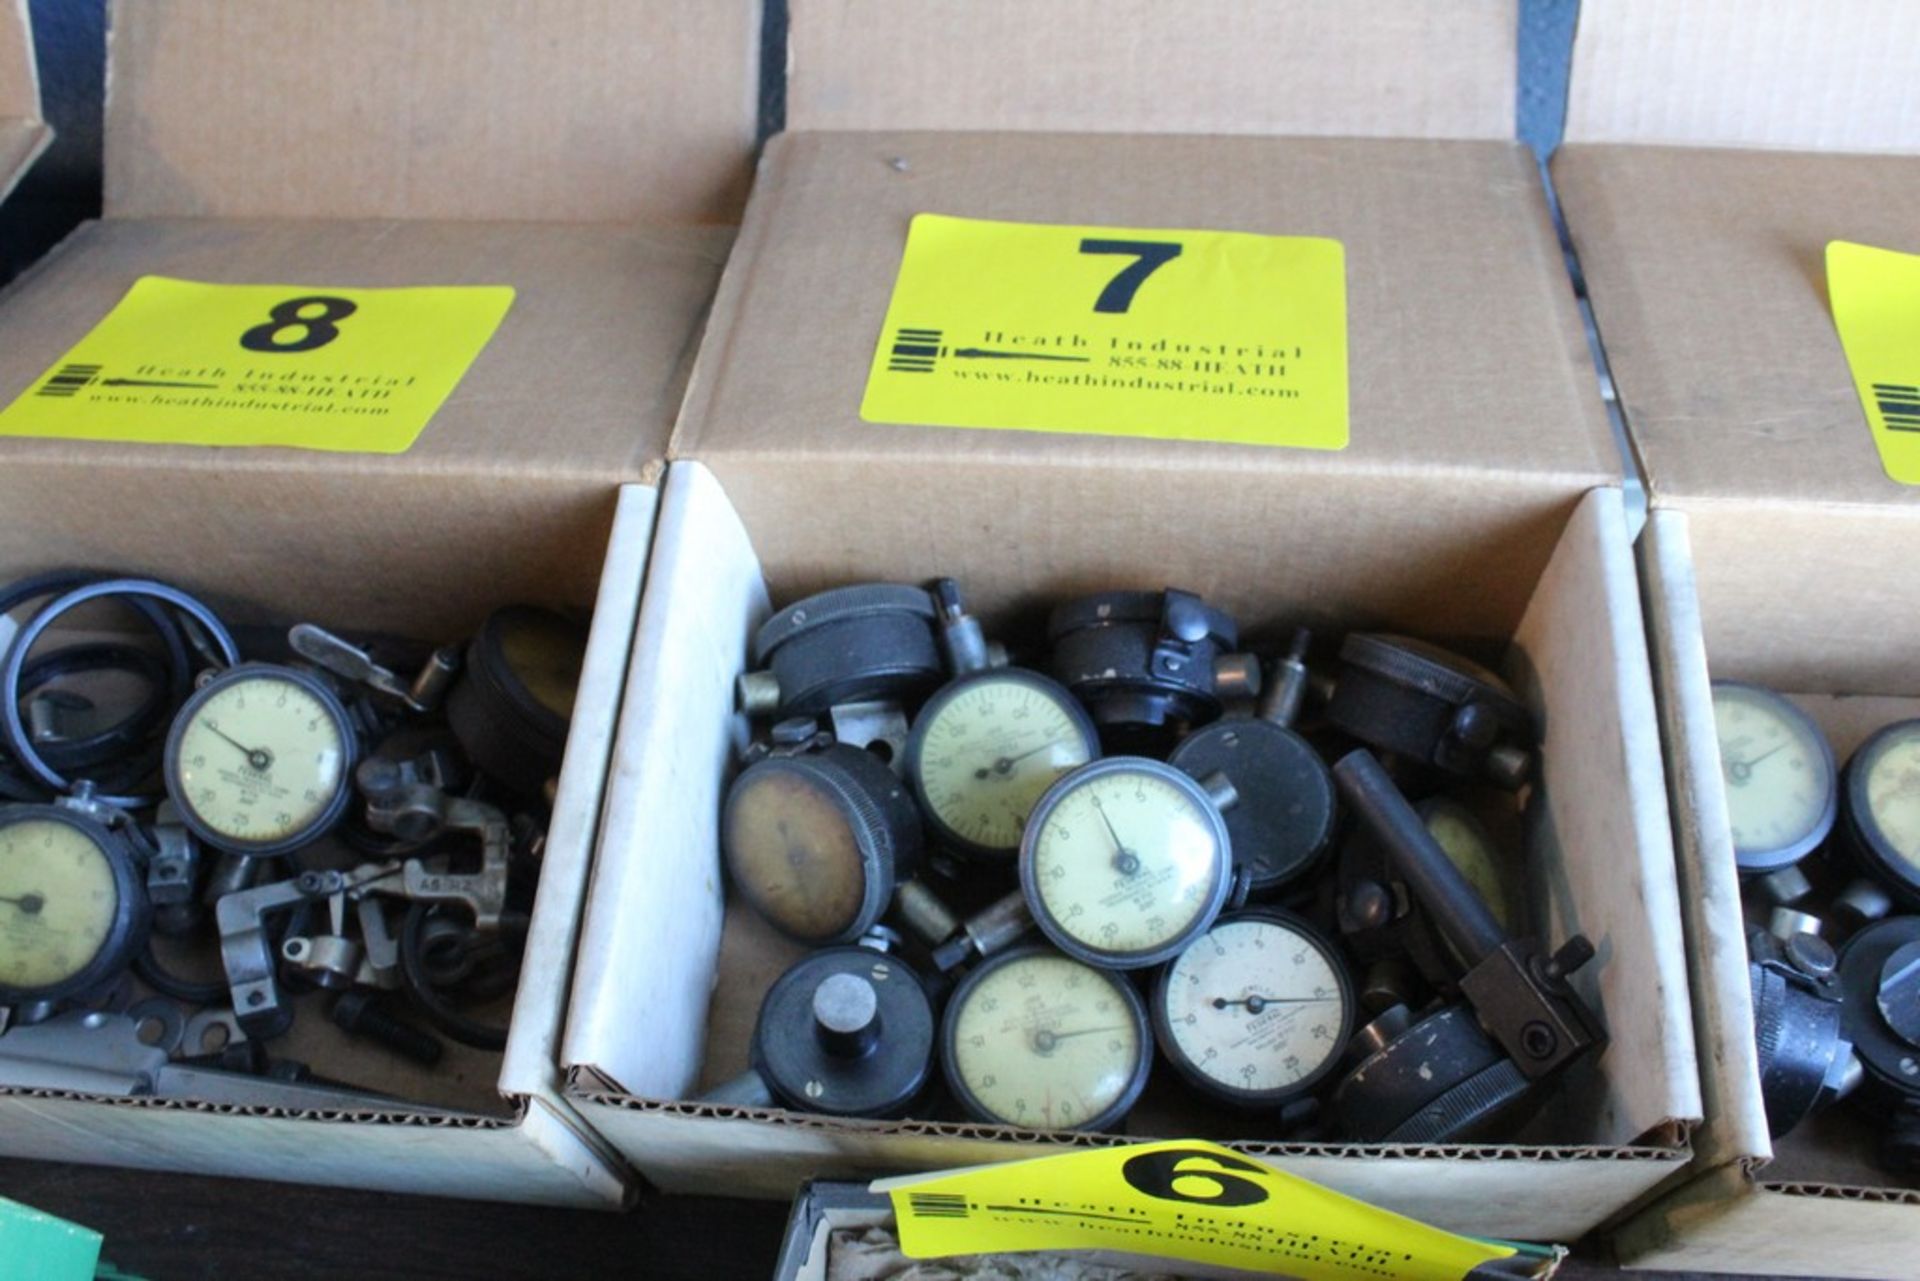 ASSORTED DIAL INDICATOR GAGES IN BOX